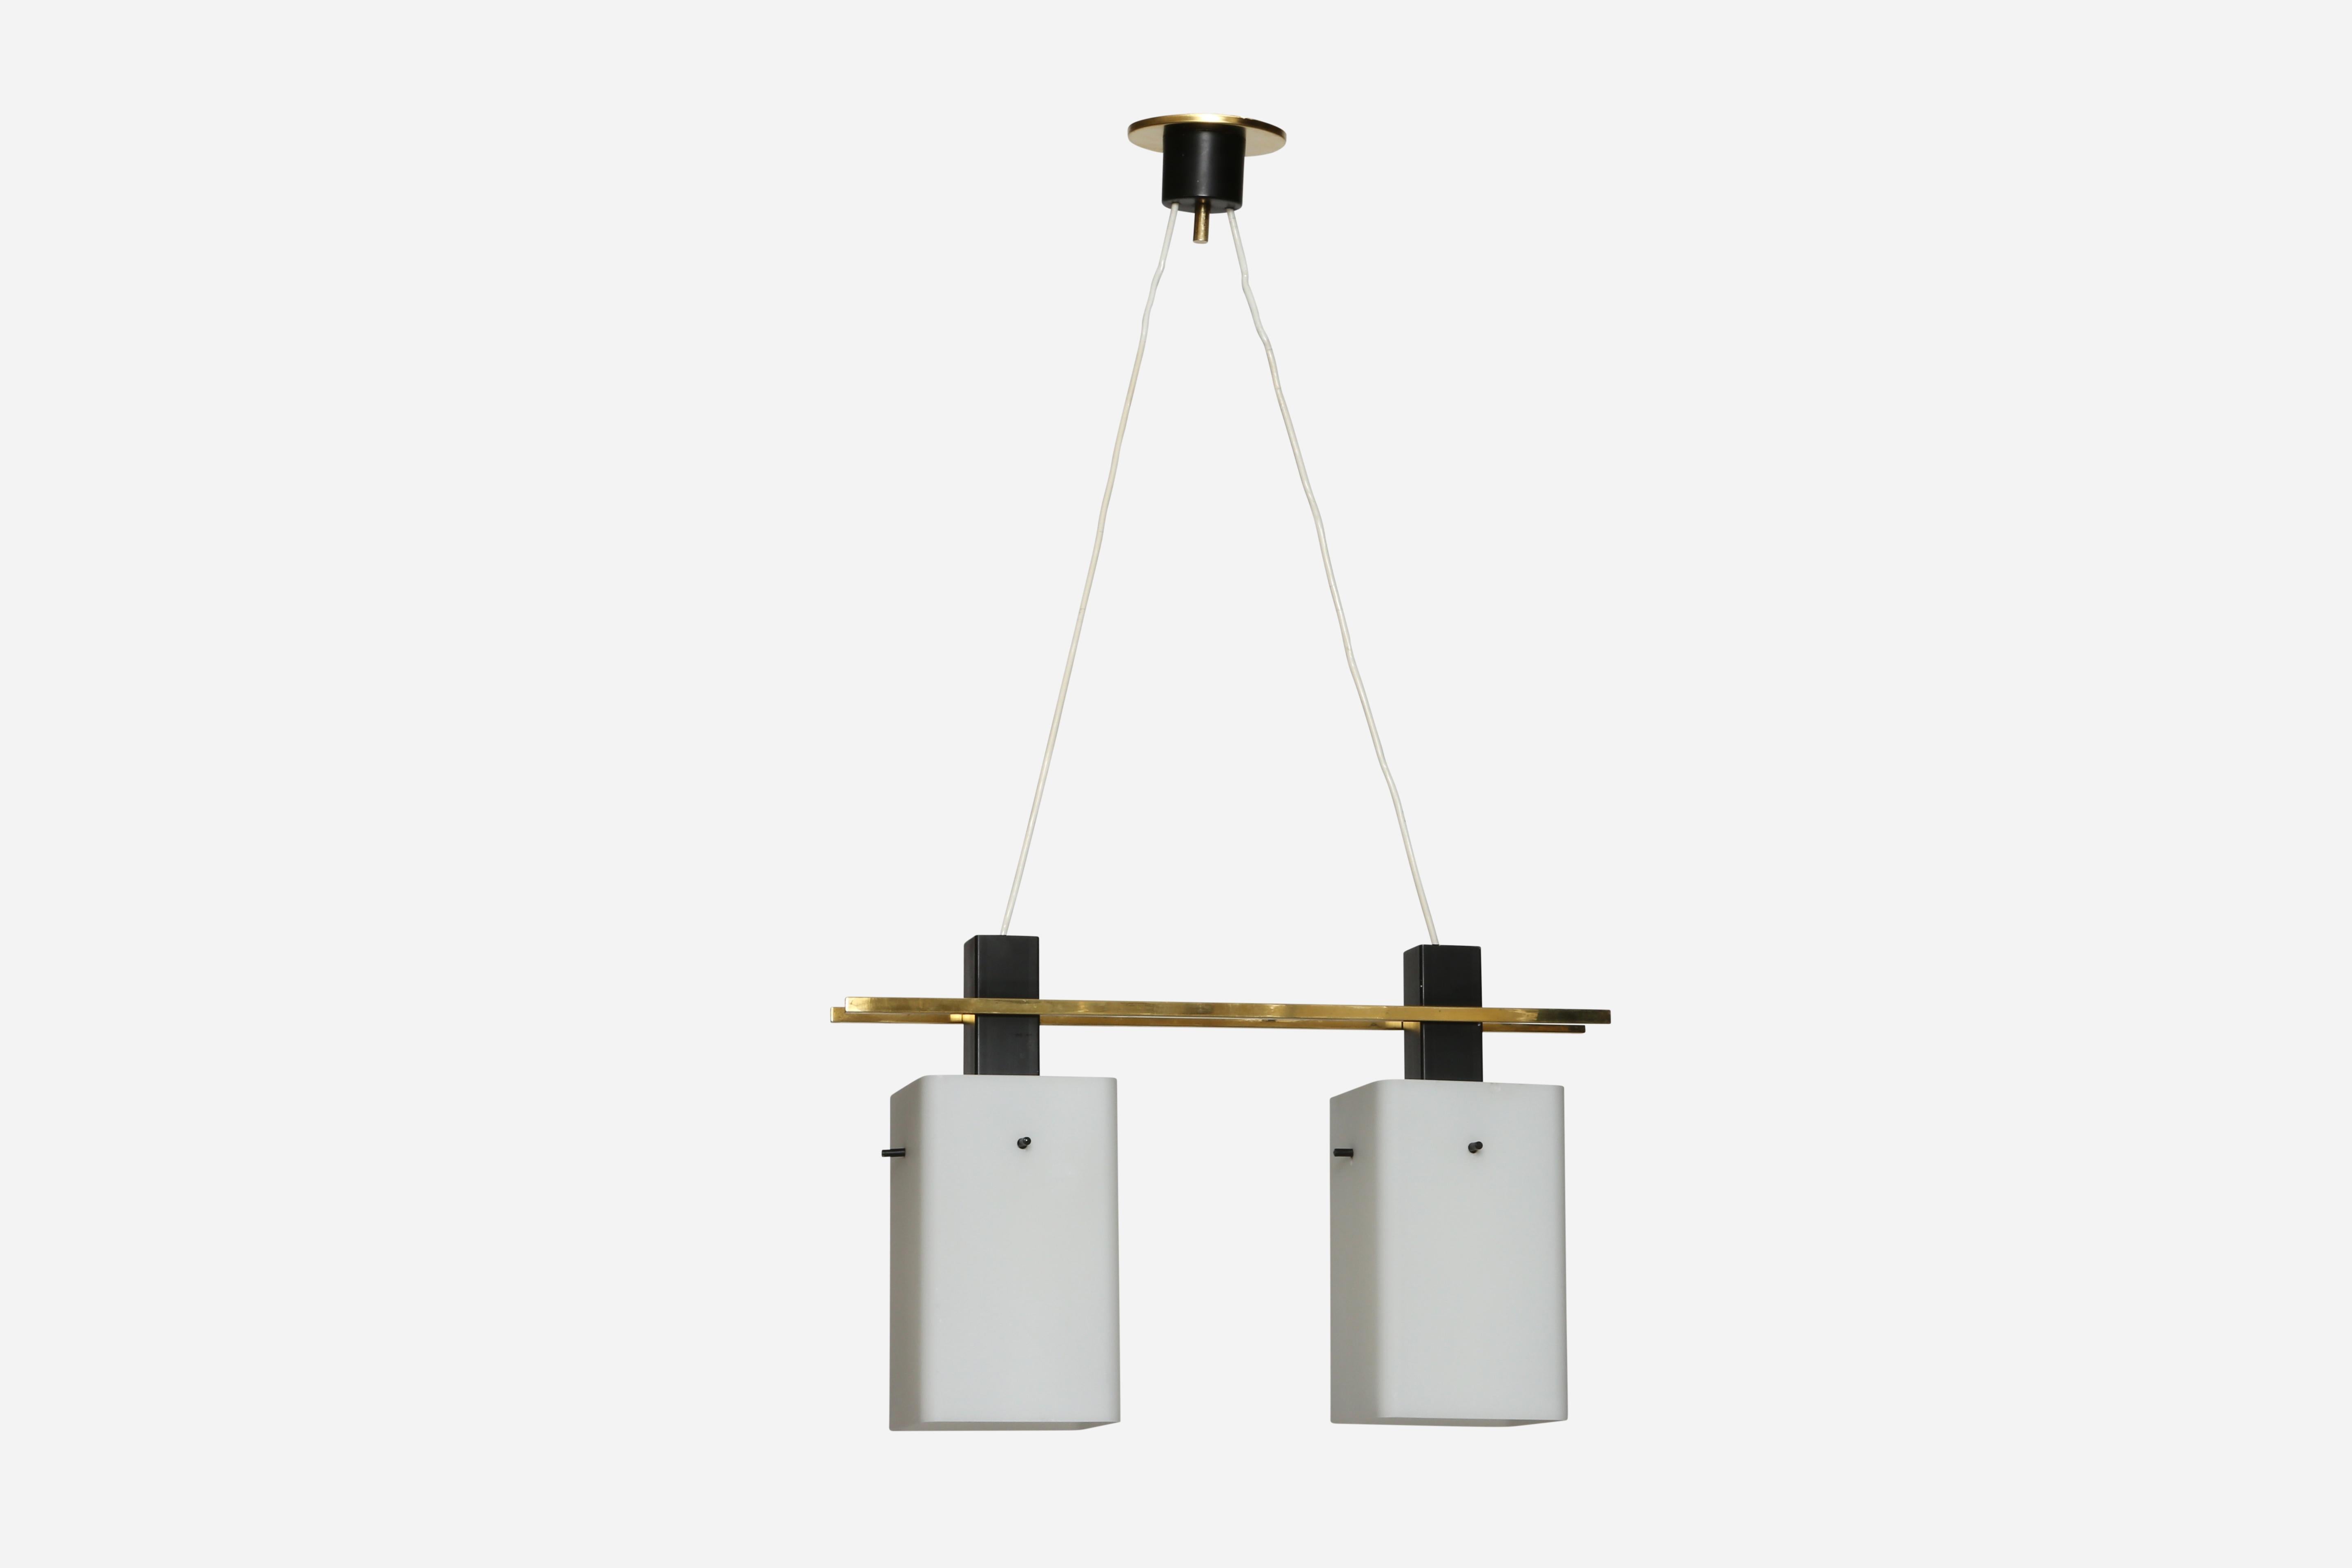 Stilnovo ceiling pendant
Designed and made in Italy, 1960s
Three cylinder opaline glass shades, brass, enameled metal.
Takes 3 medium base bulb. 
Complimentary US rewiring upon request.
Overall drop is adjustable.
Height of the glass is 10